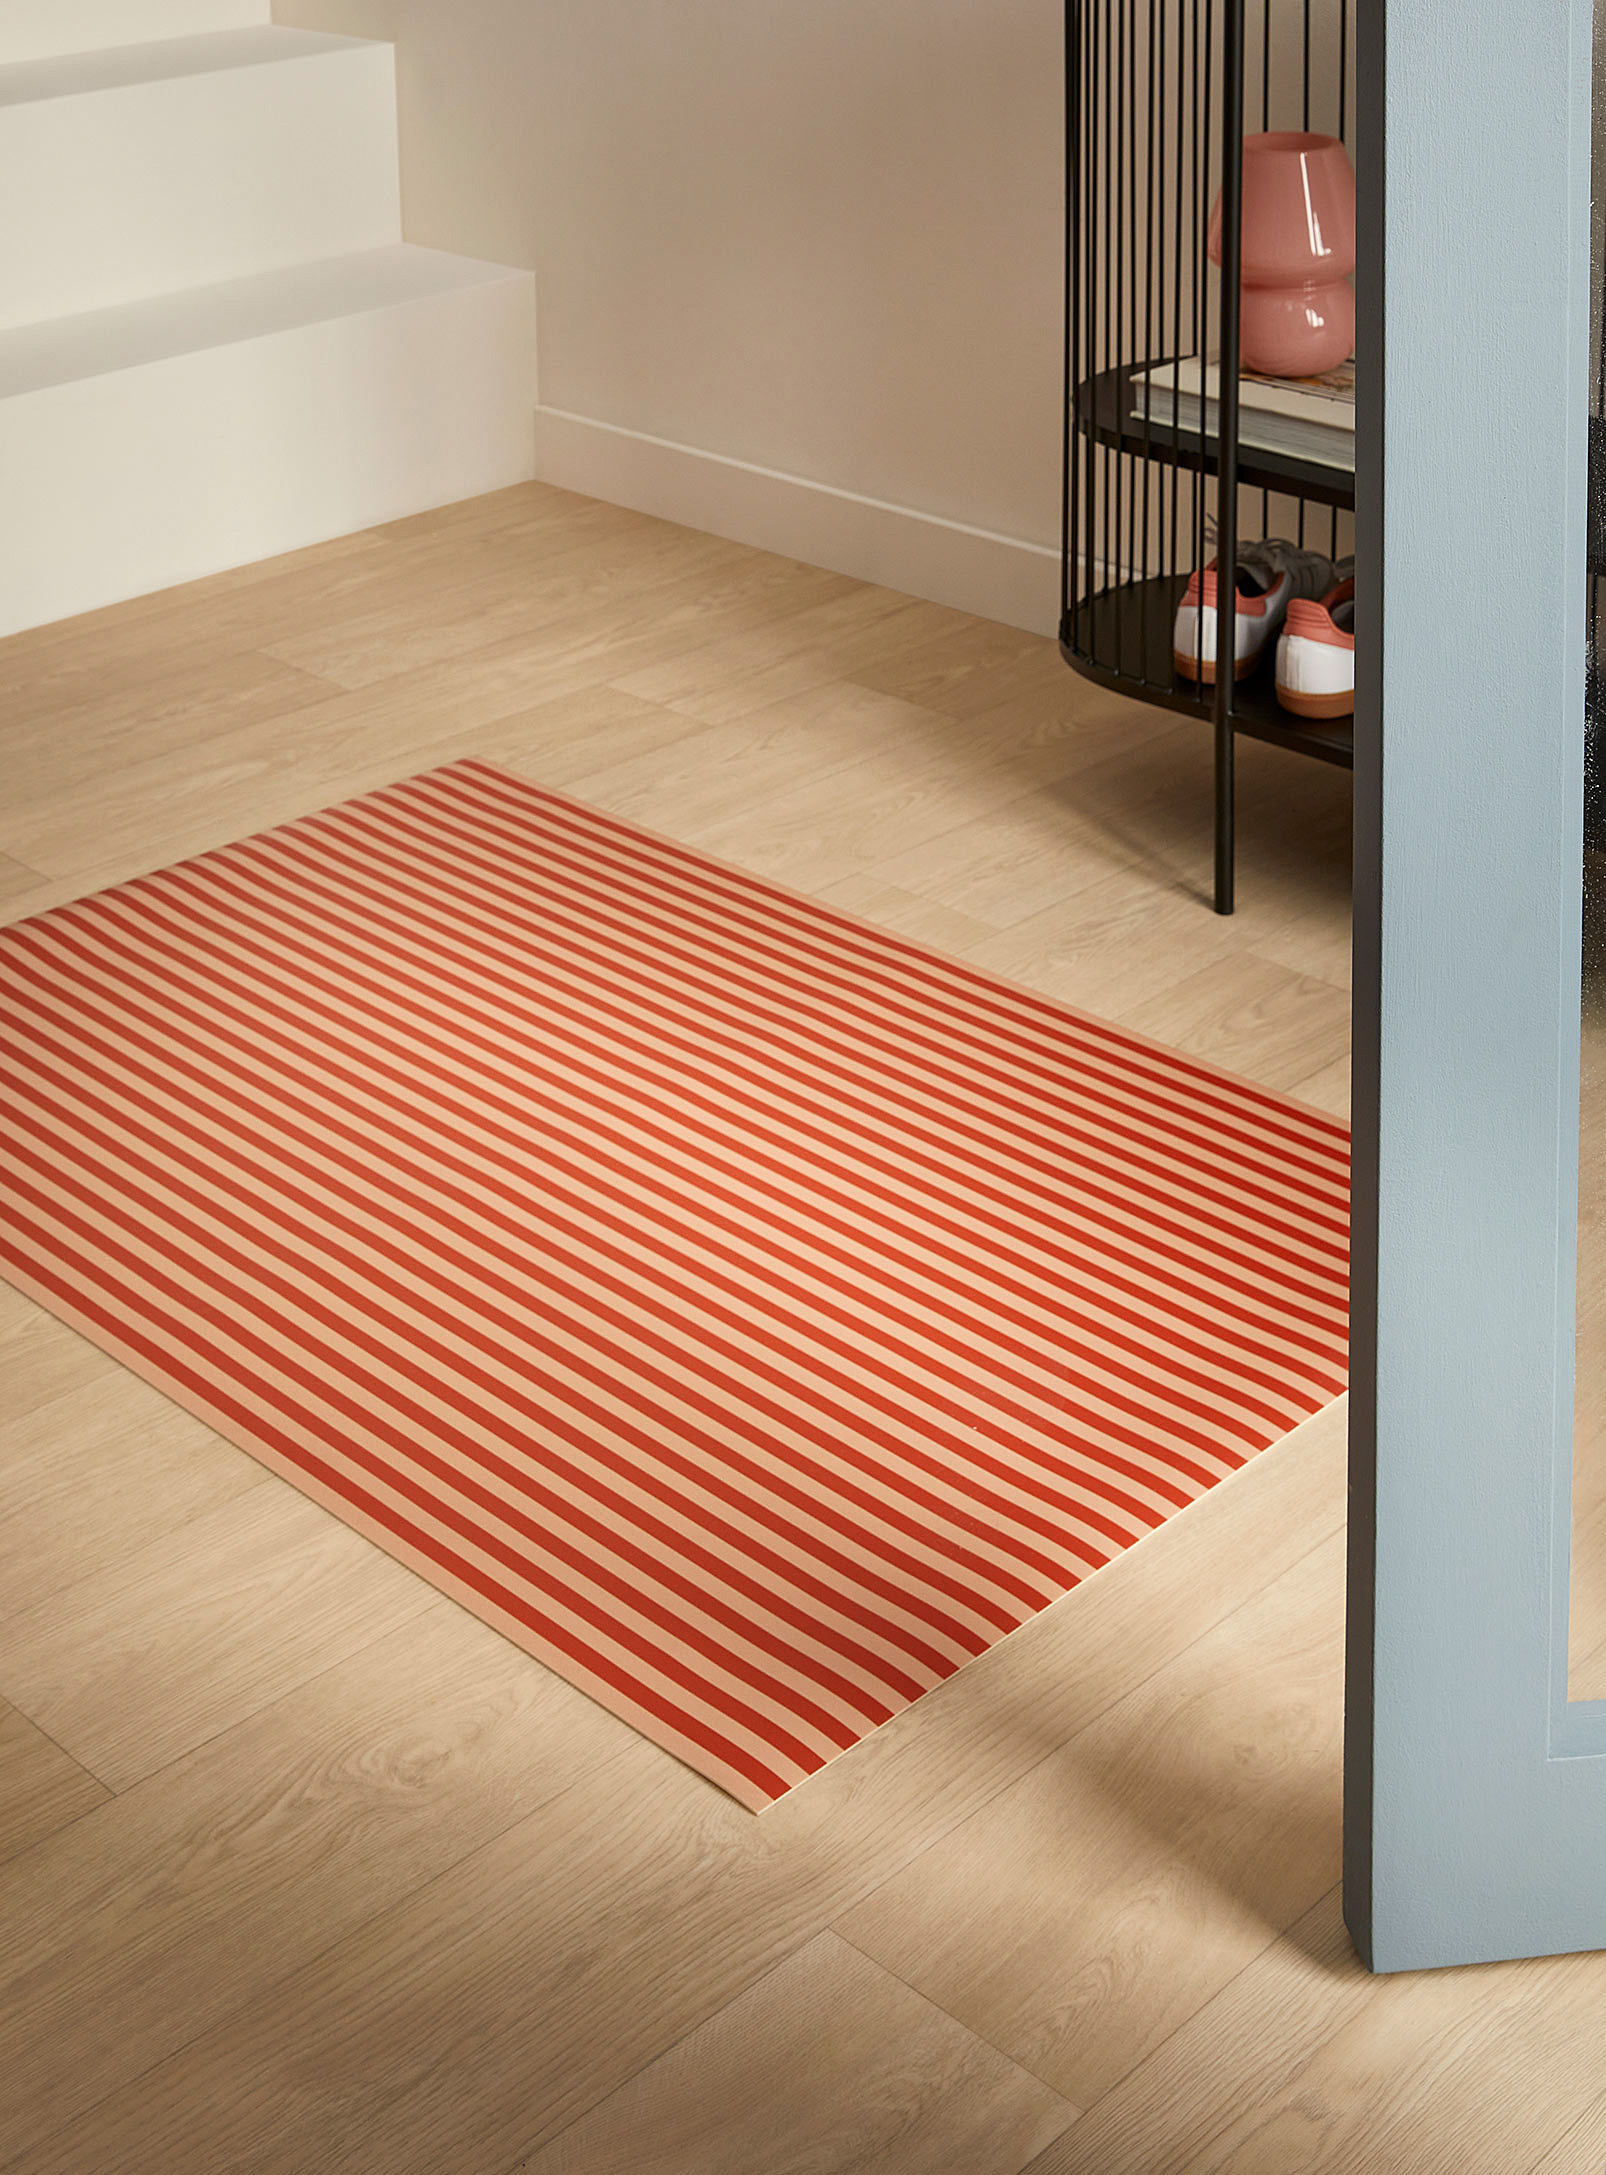 Adama Sweet Stripes Vinyl Mat See Available Sizes In Patterned Red